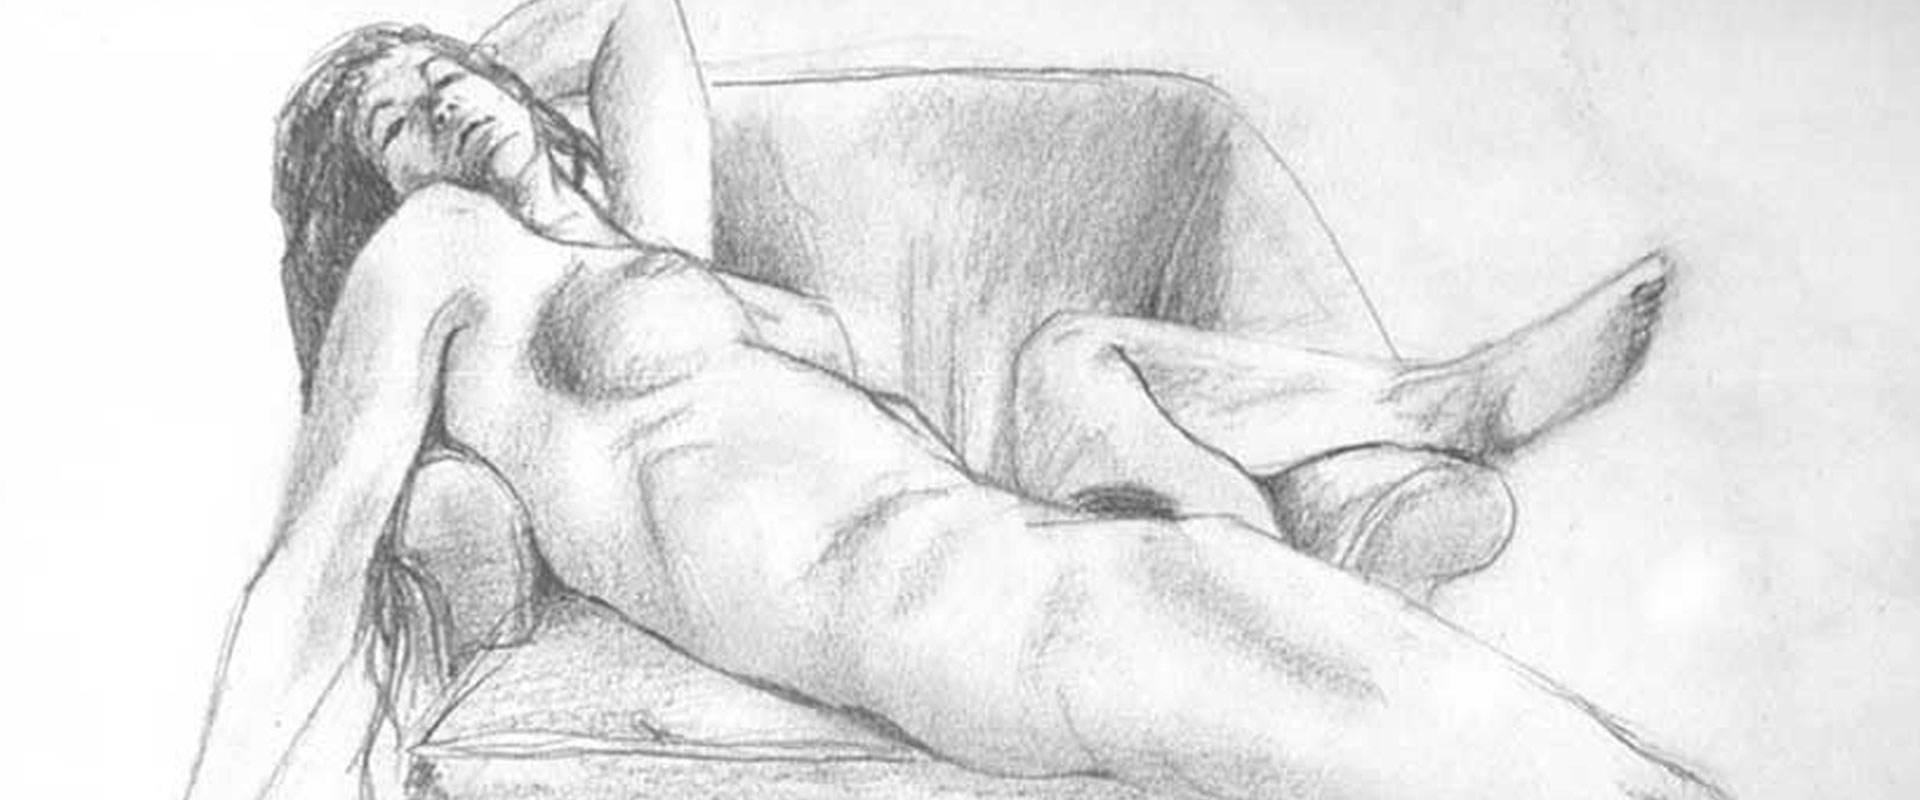 Gallery - Live Nude Figure Drawing